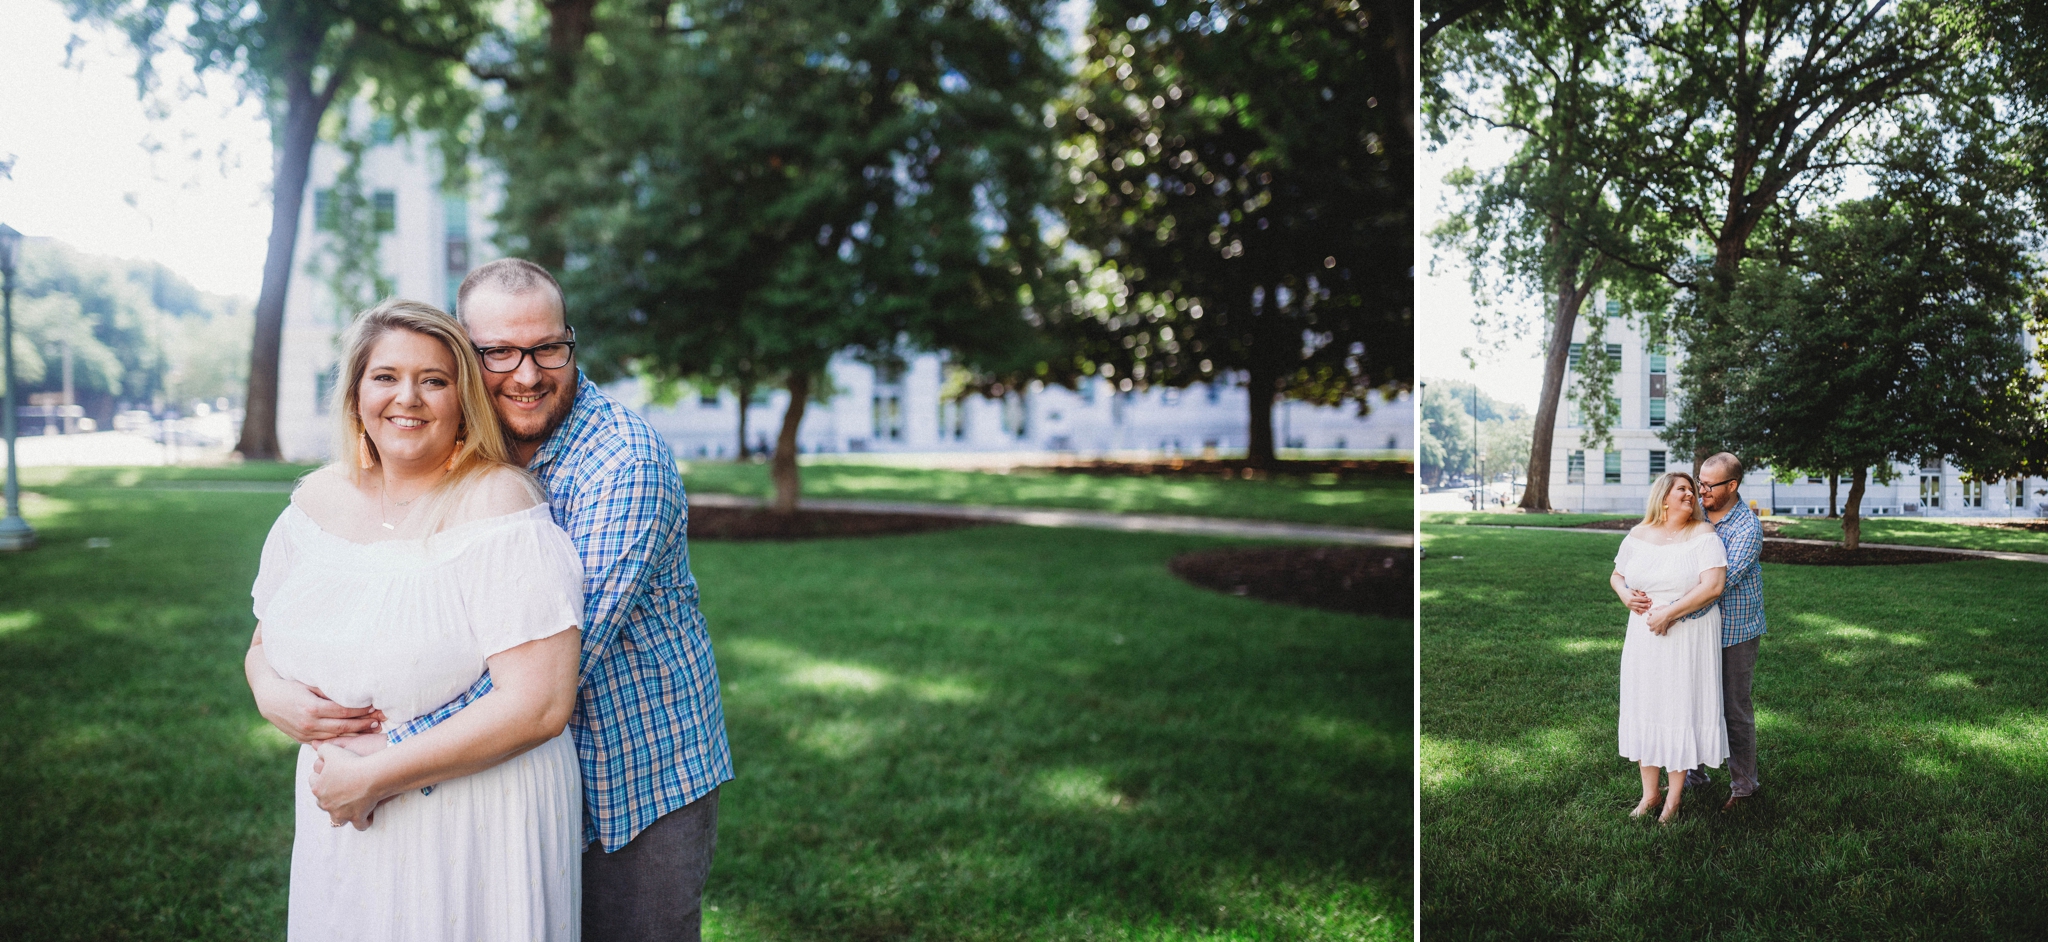 Brittany + Douglas - Downtown Raleigh Engagement Photography Session - Raleigh Wedding Photographer 12.jpg